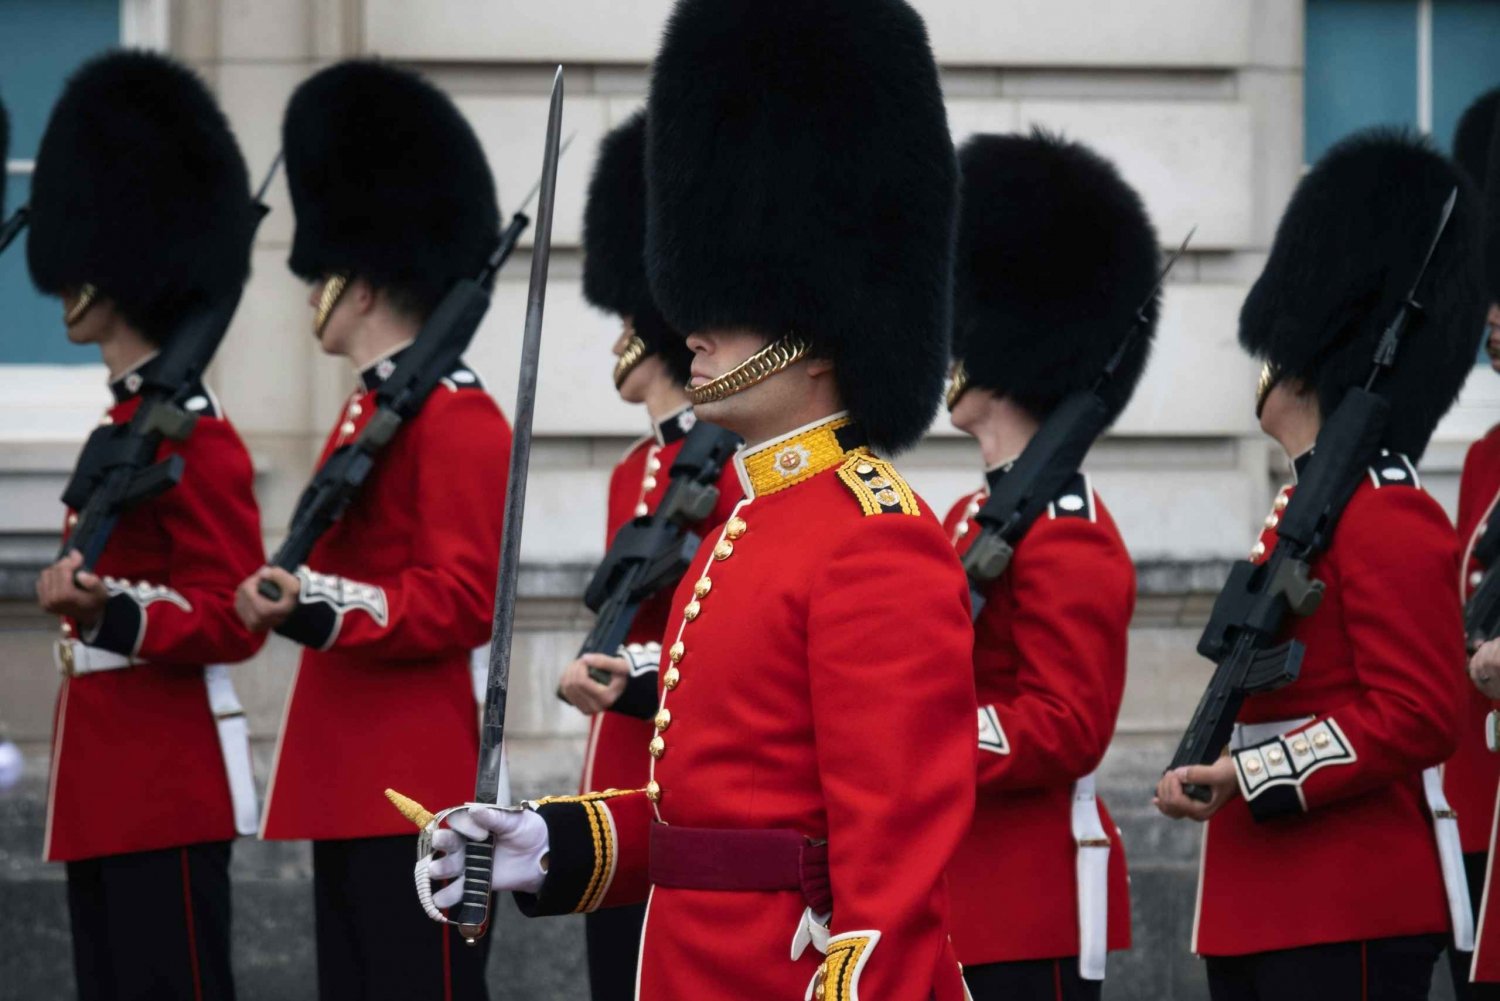 London: The Changing of the Guard Experience Tour